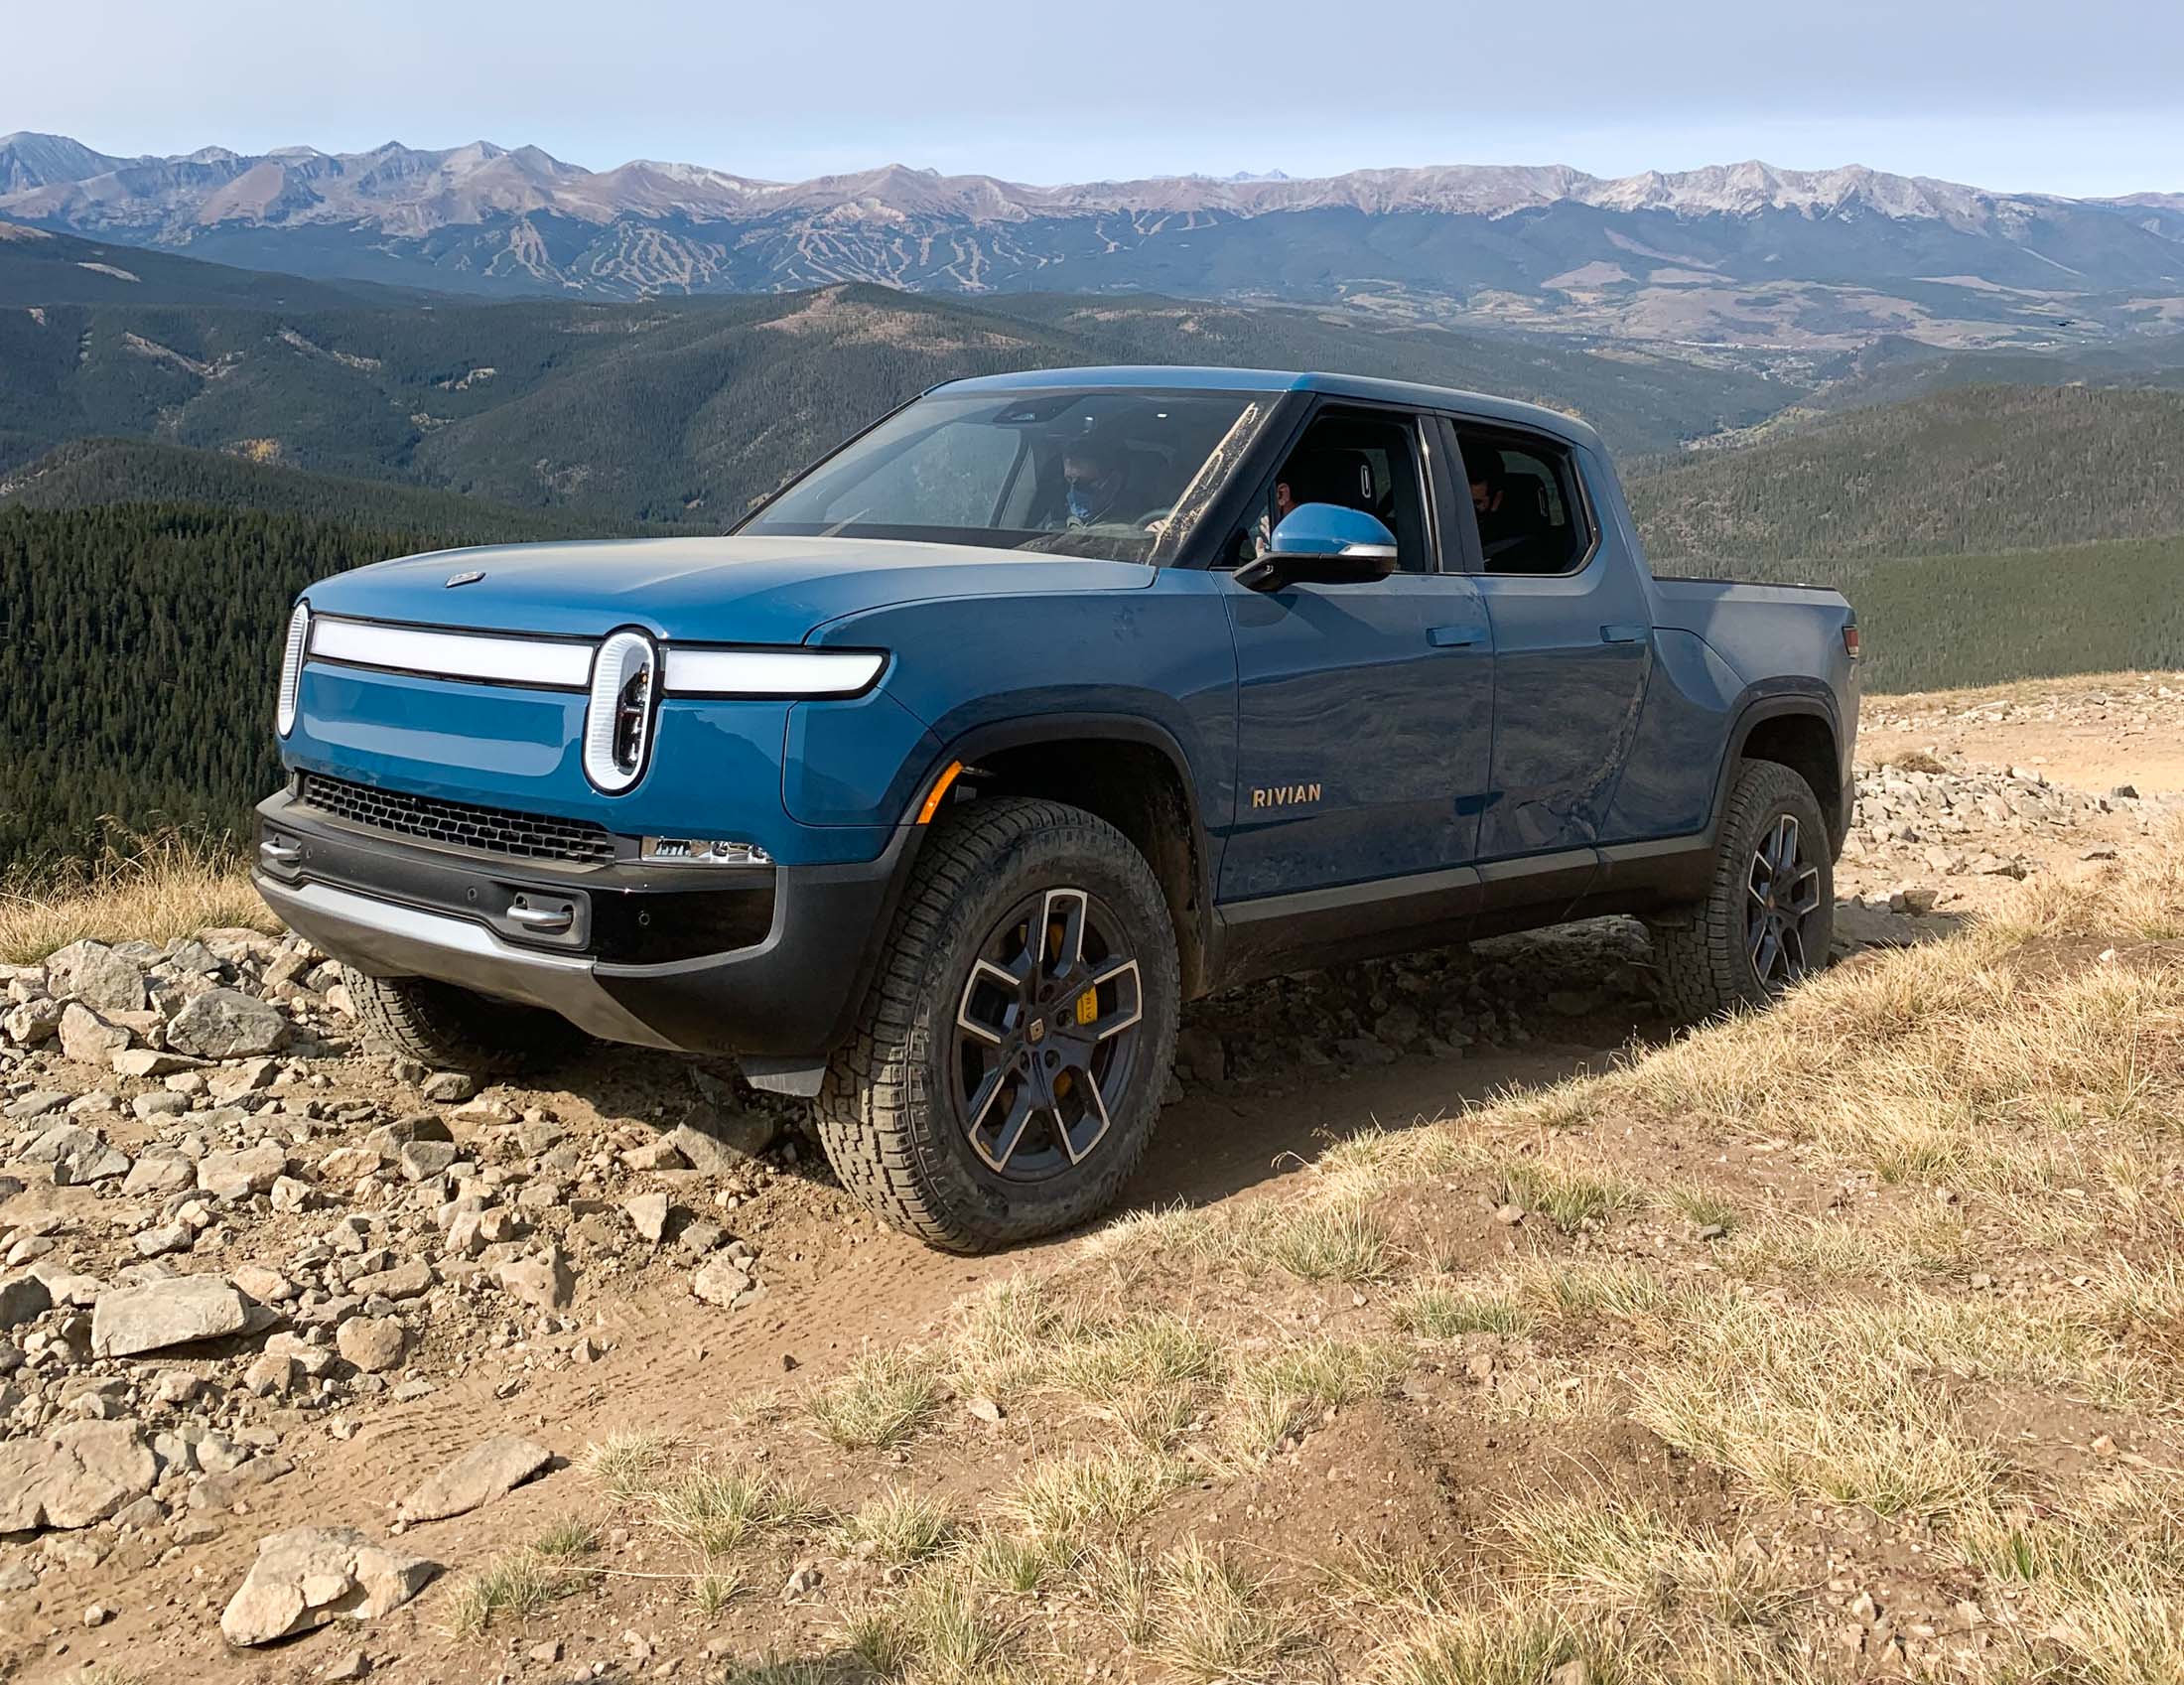 Rivian Automotive Files for IPO, Electric Truck Startup Backed by